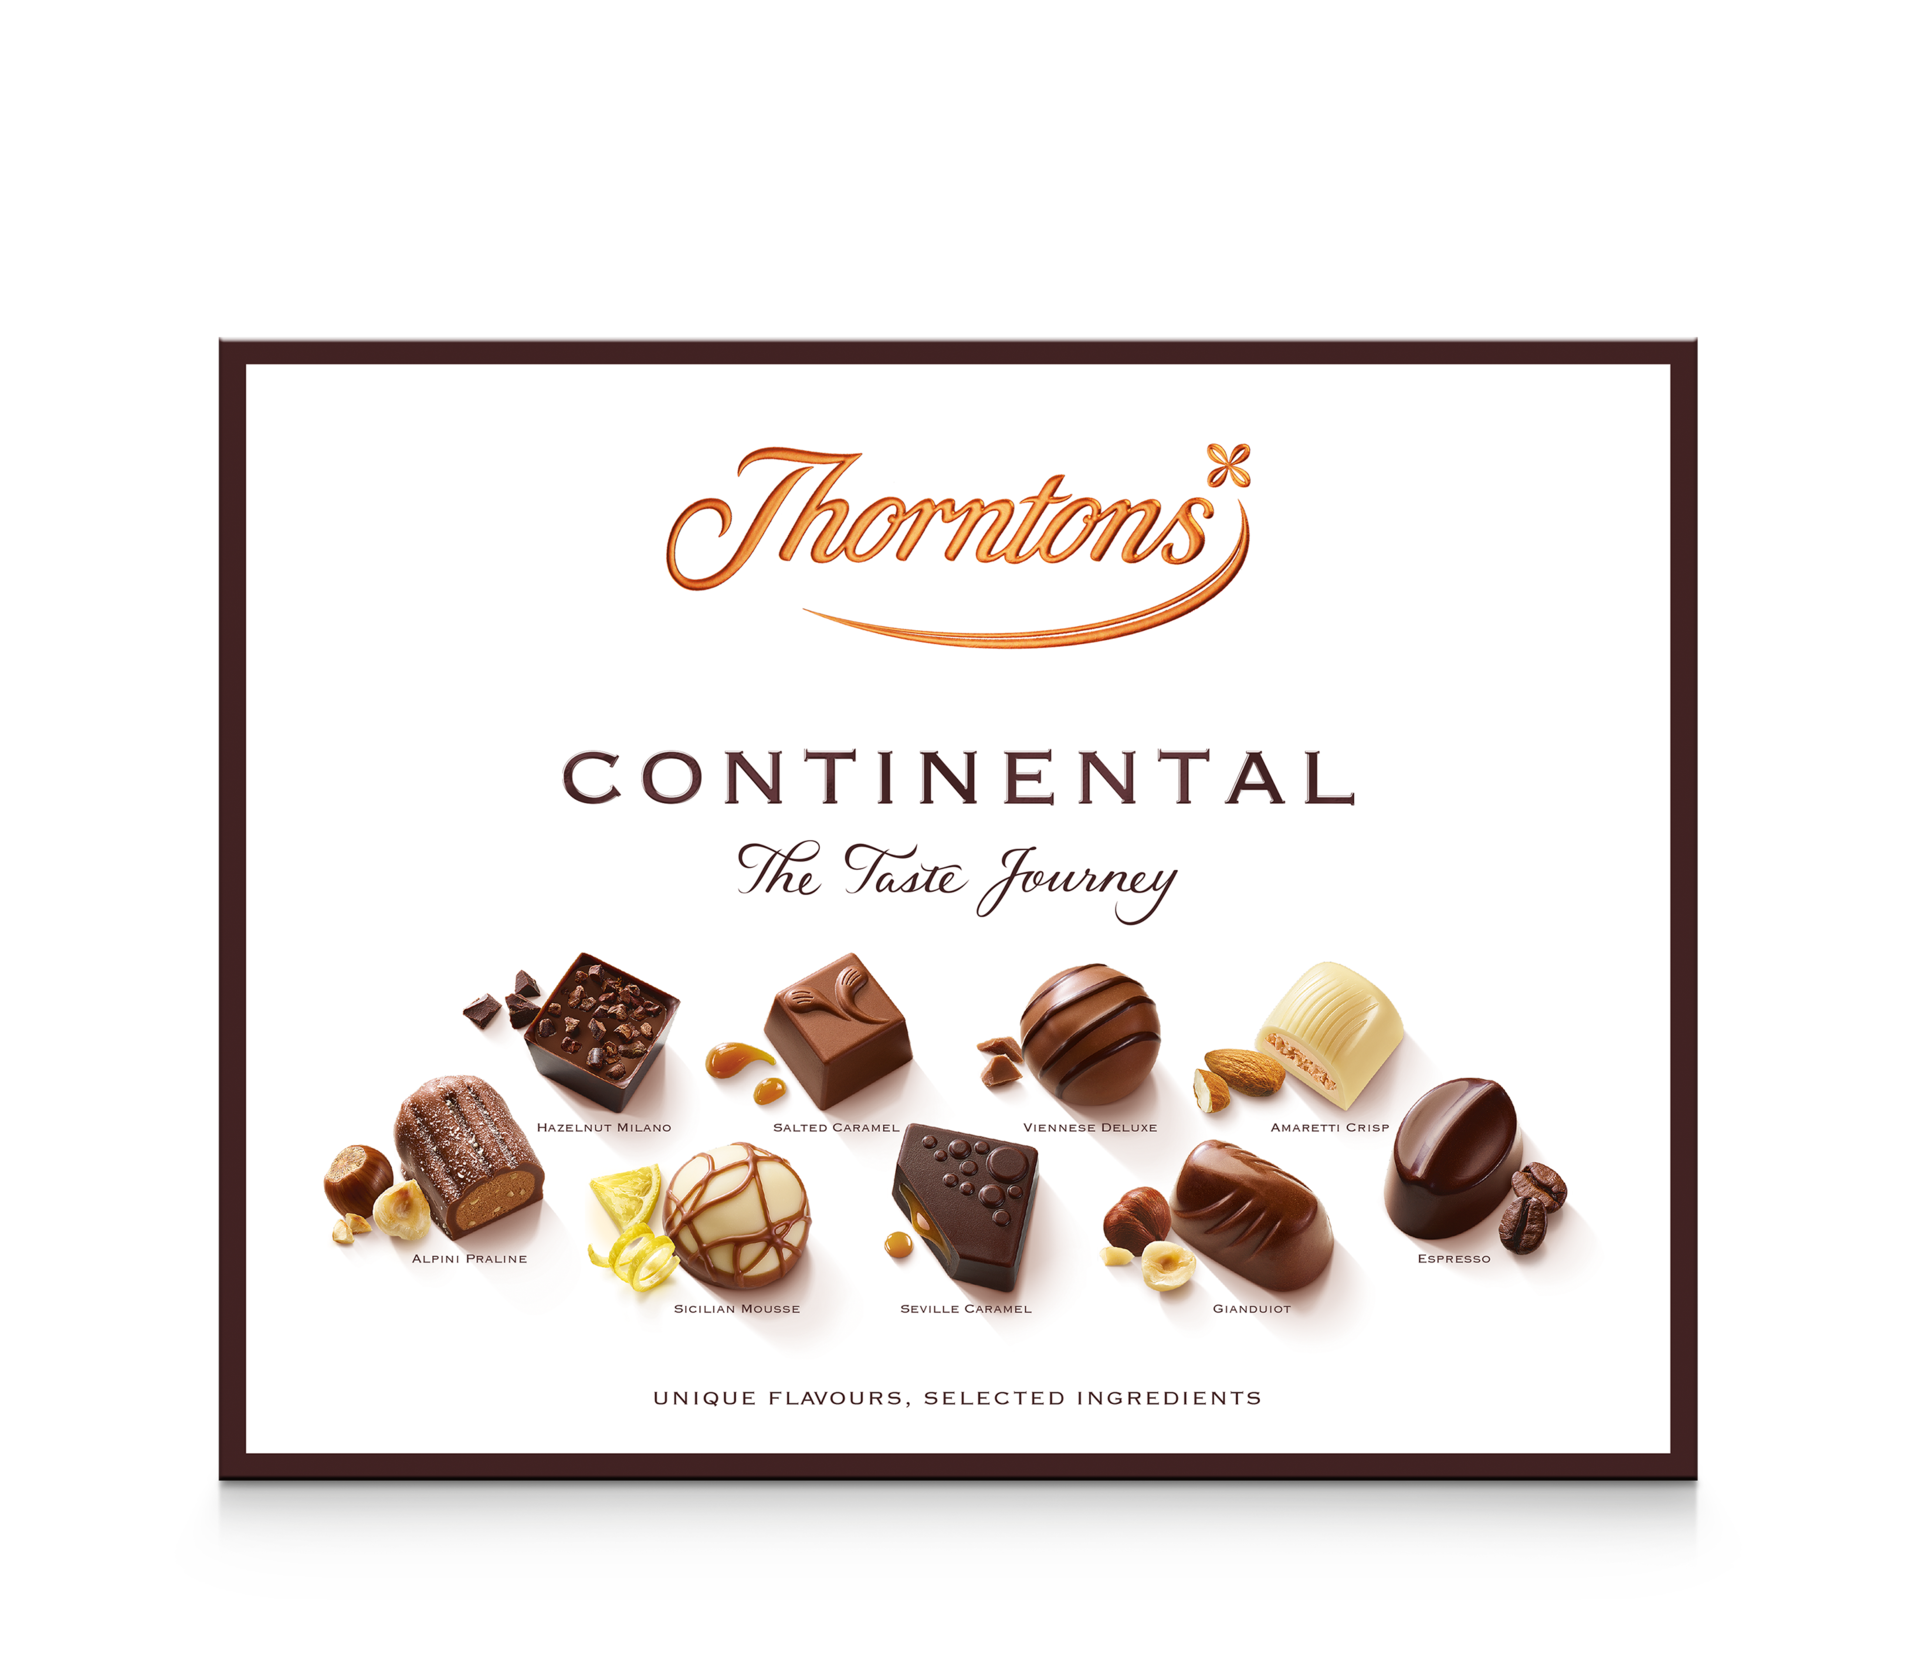 https://www.thorntons.com/medias/sys_master/images/hac/h07/8916765311006/77229484_main/77229484-main.png?resize=ProductGridComponent